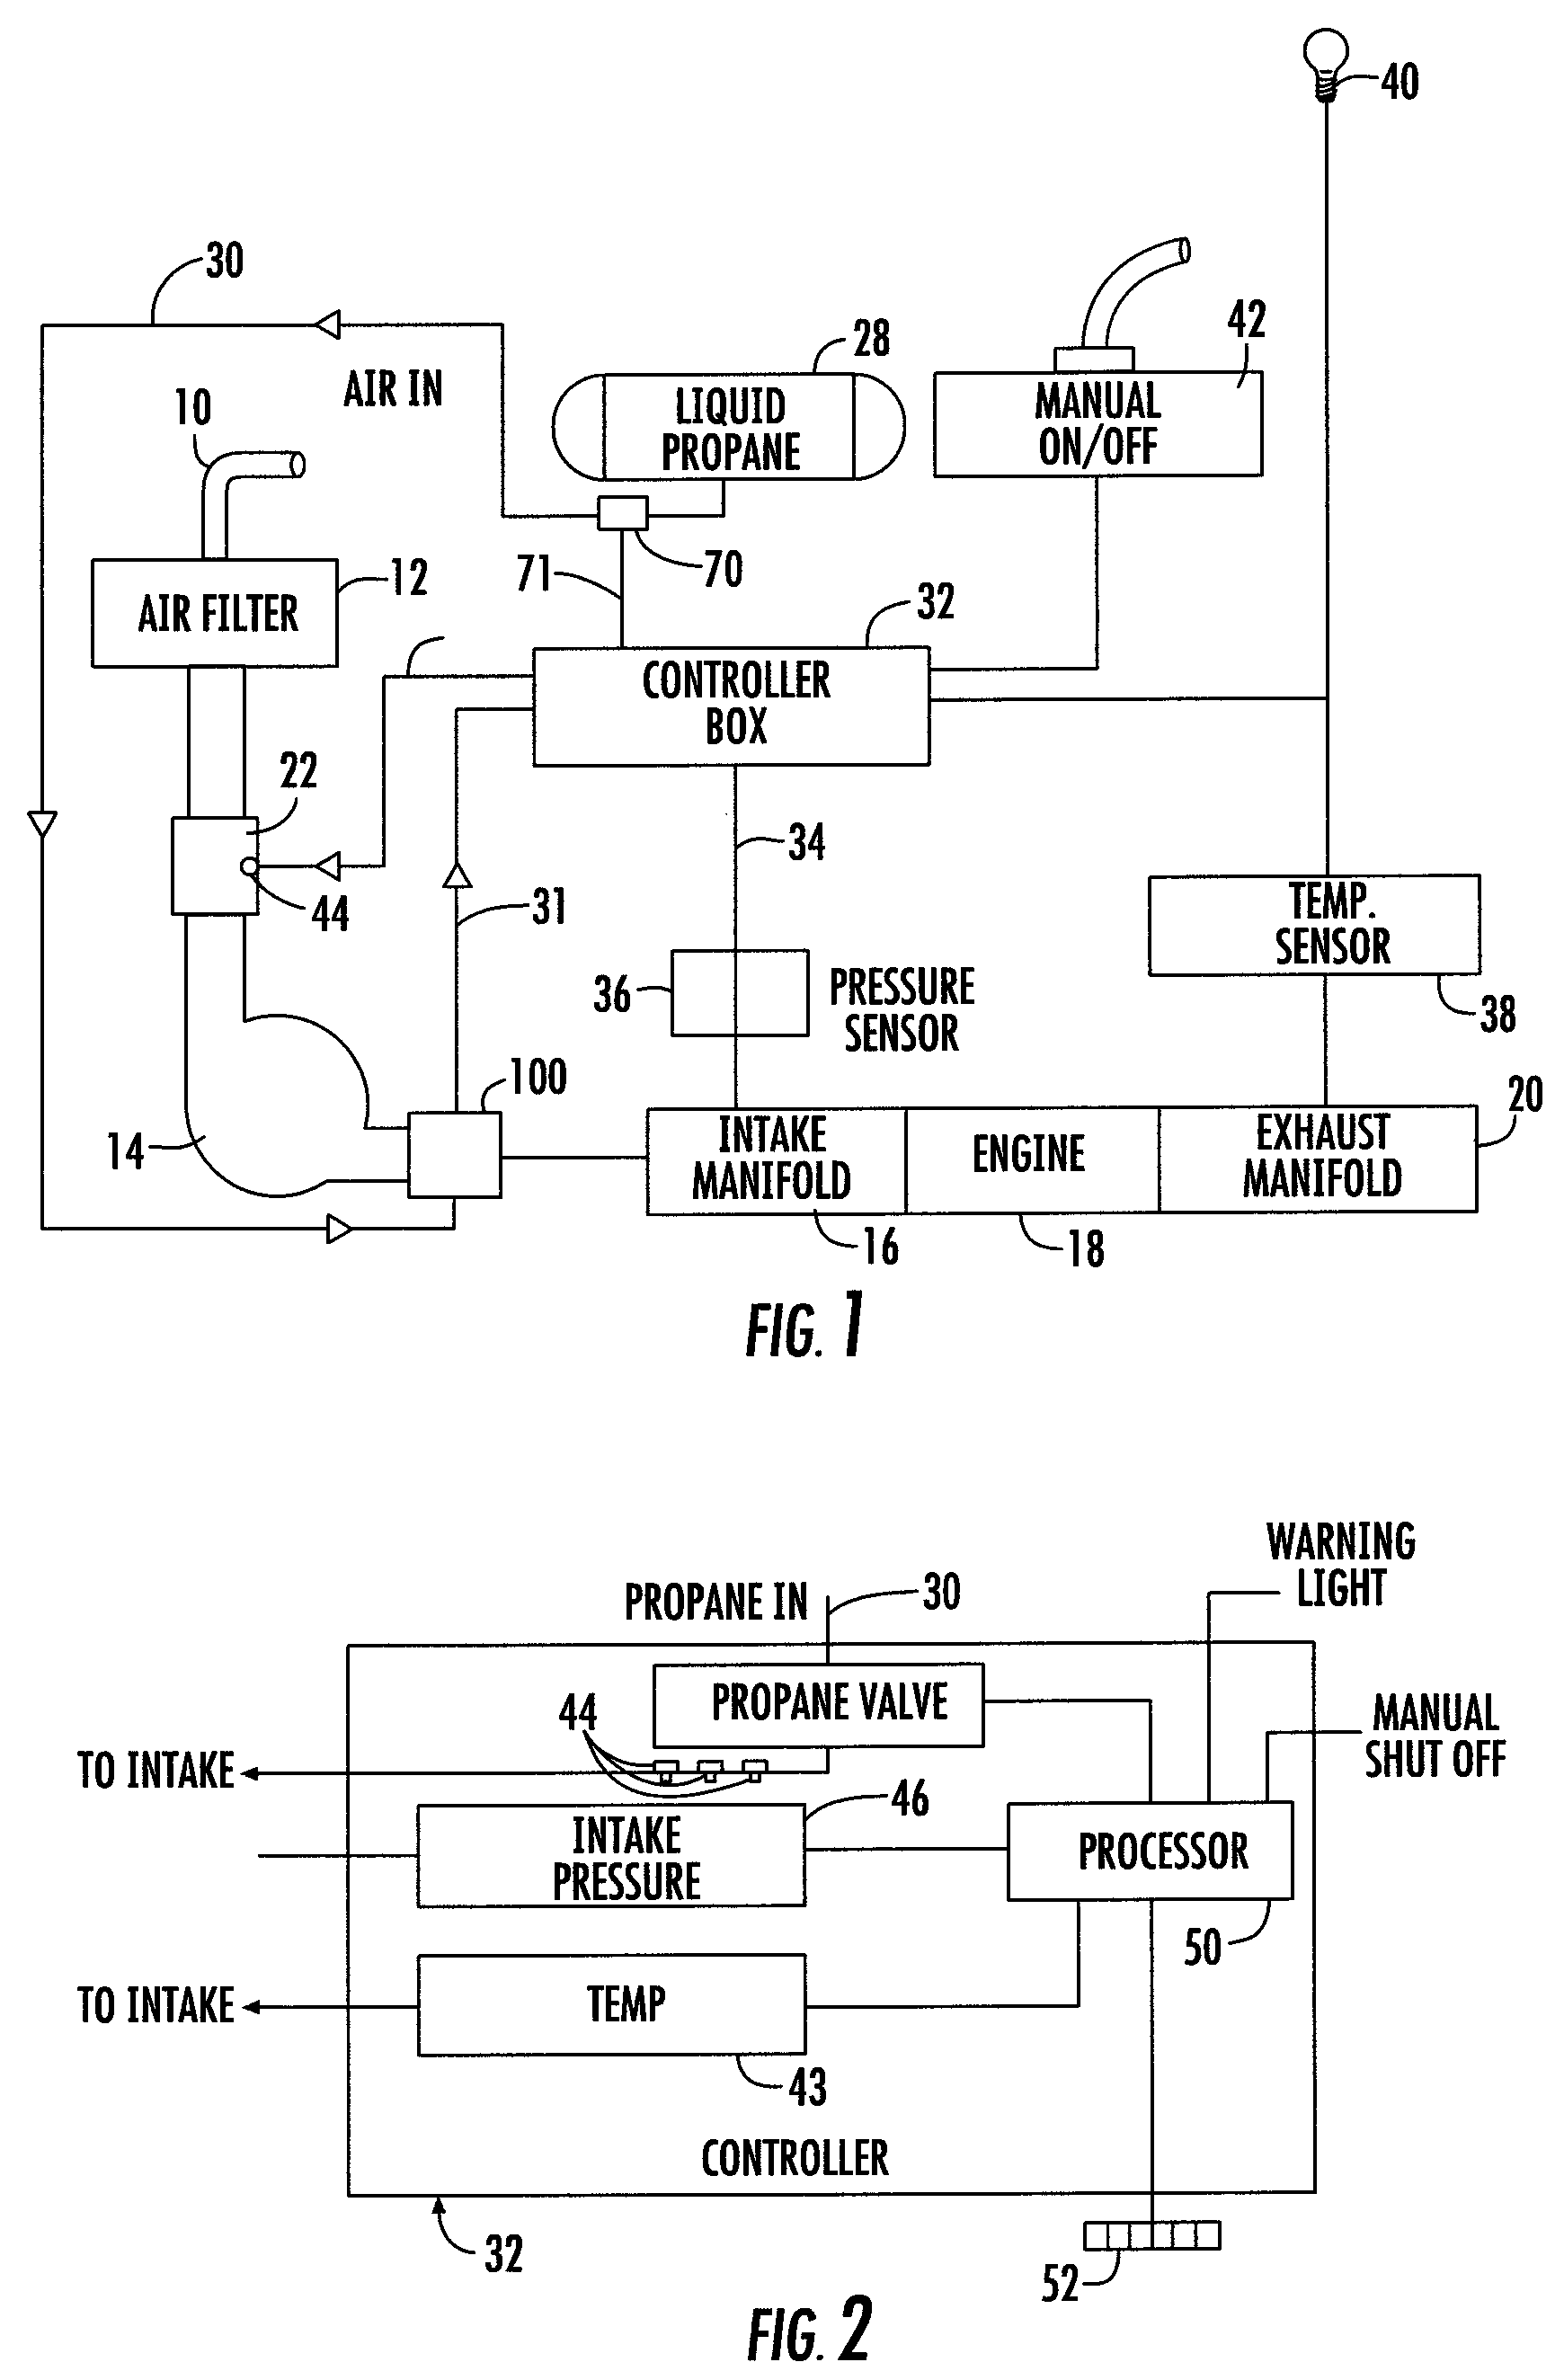 Super cooled air and fuel induction system for internal combustion engines